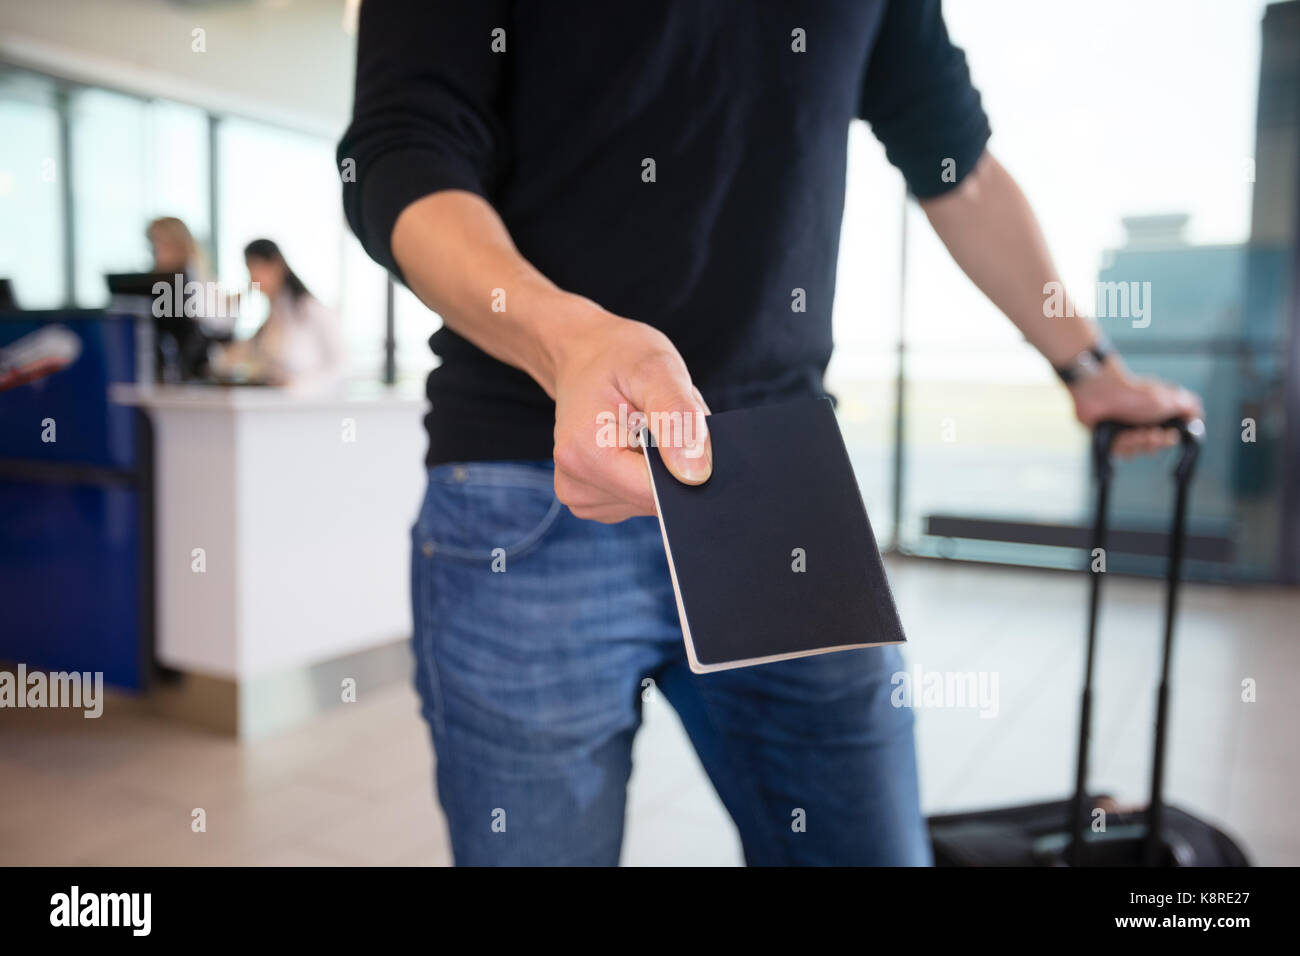 Midsection Of Male Passenger Showing Passport At Airport Stock Photo